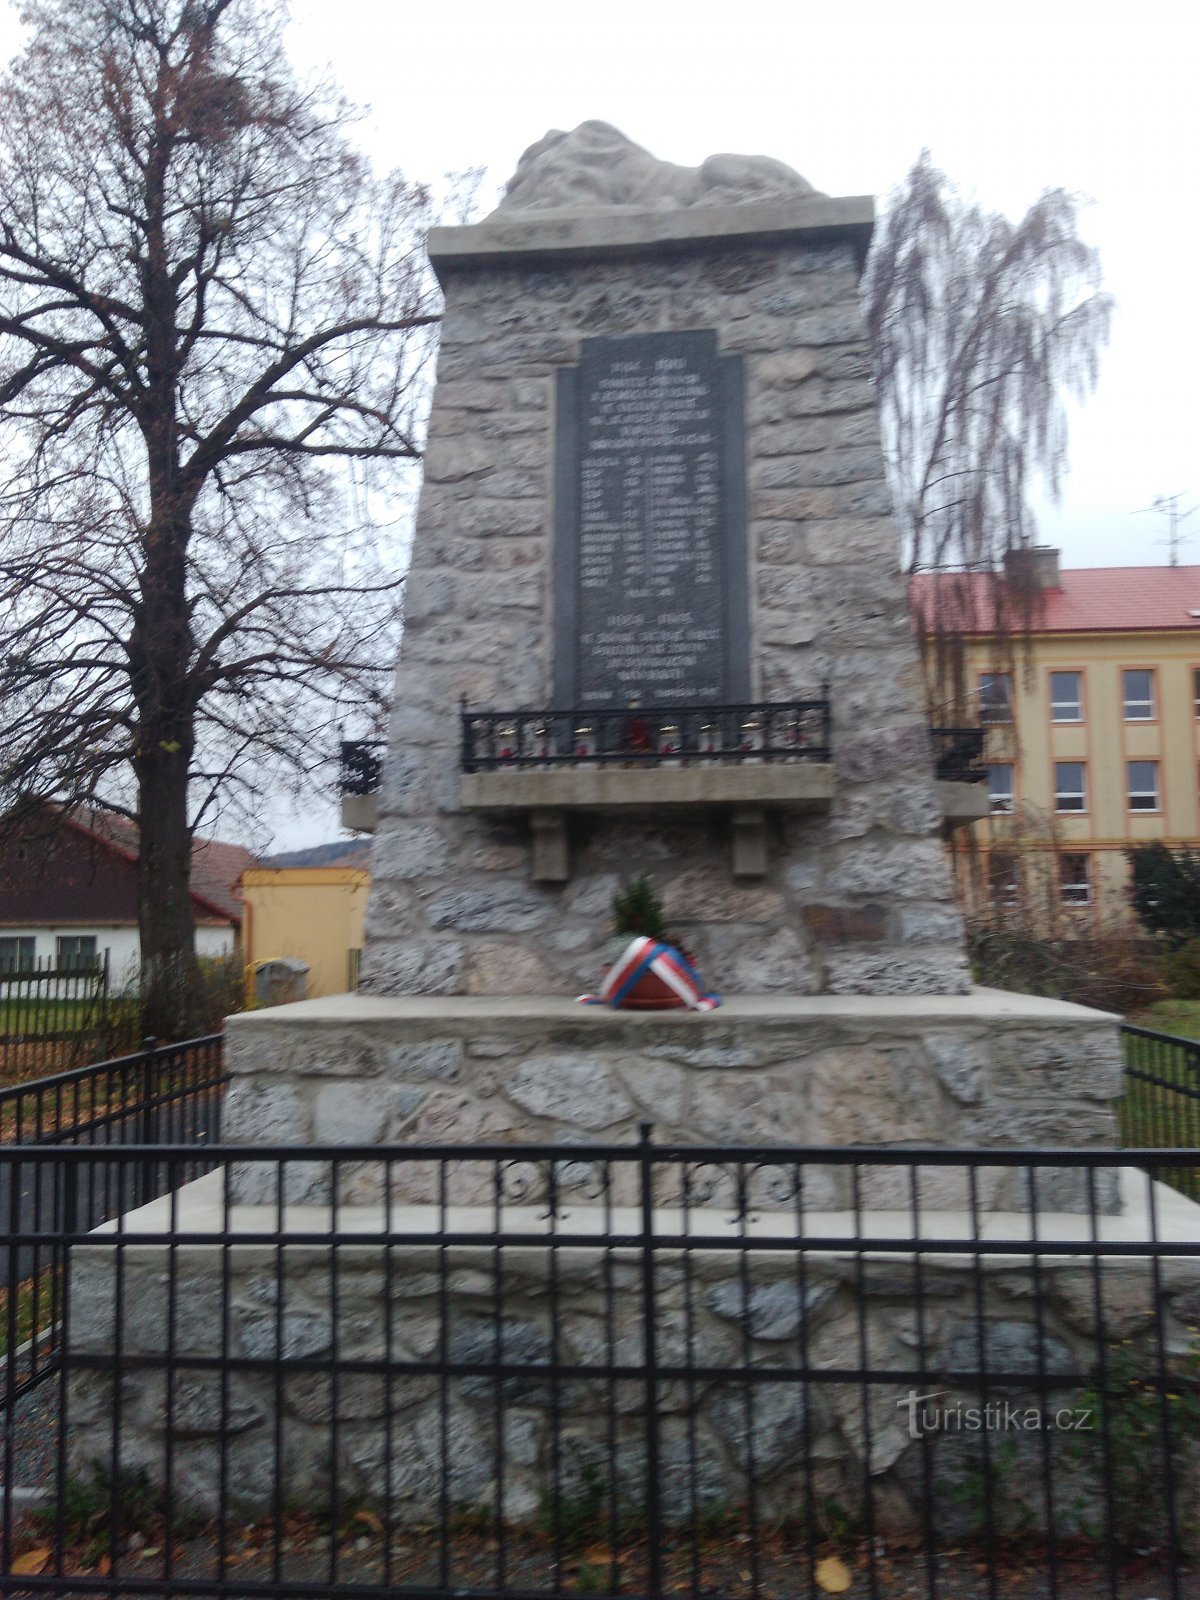 Monument to the fallen in Prachovice